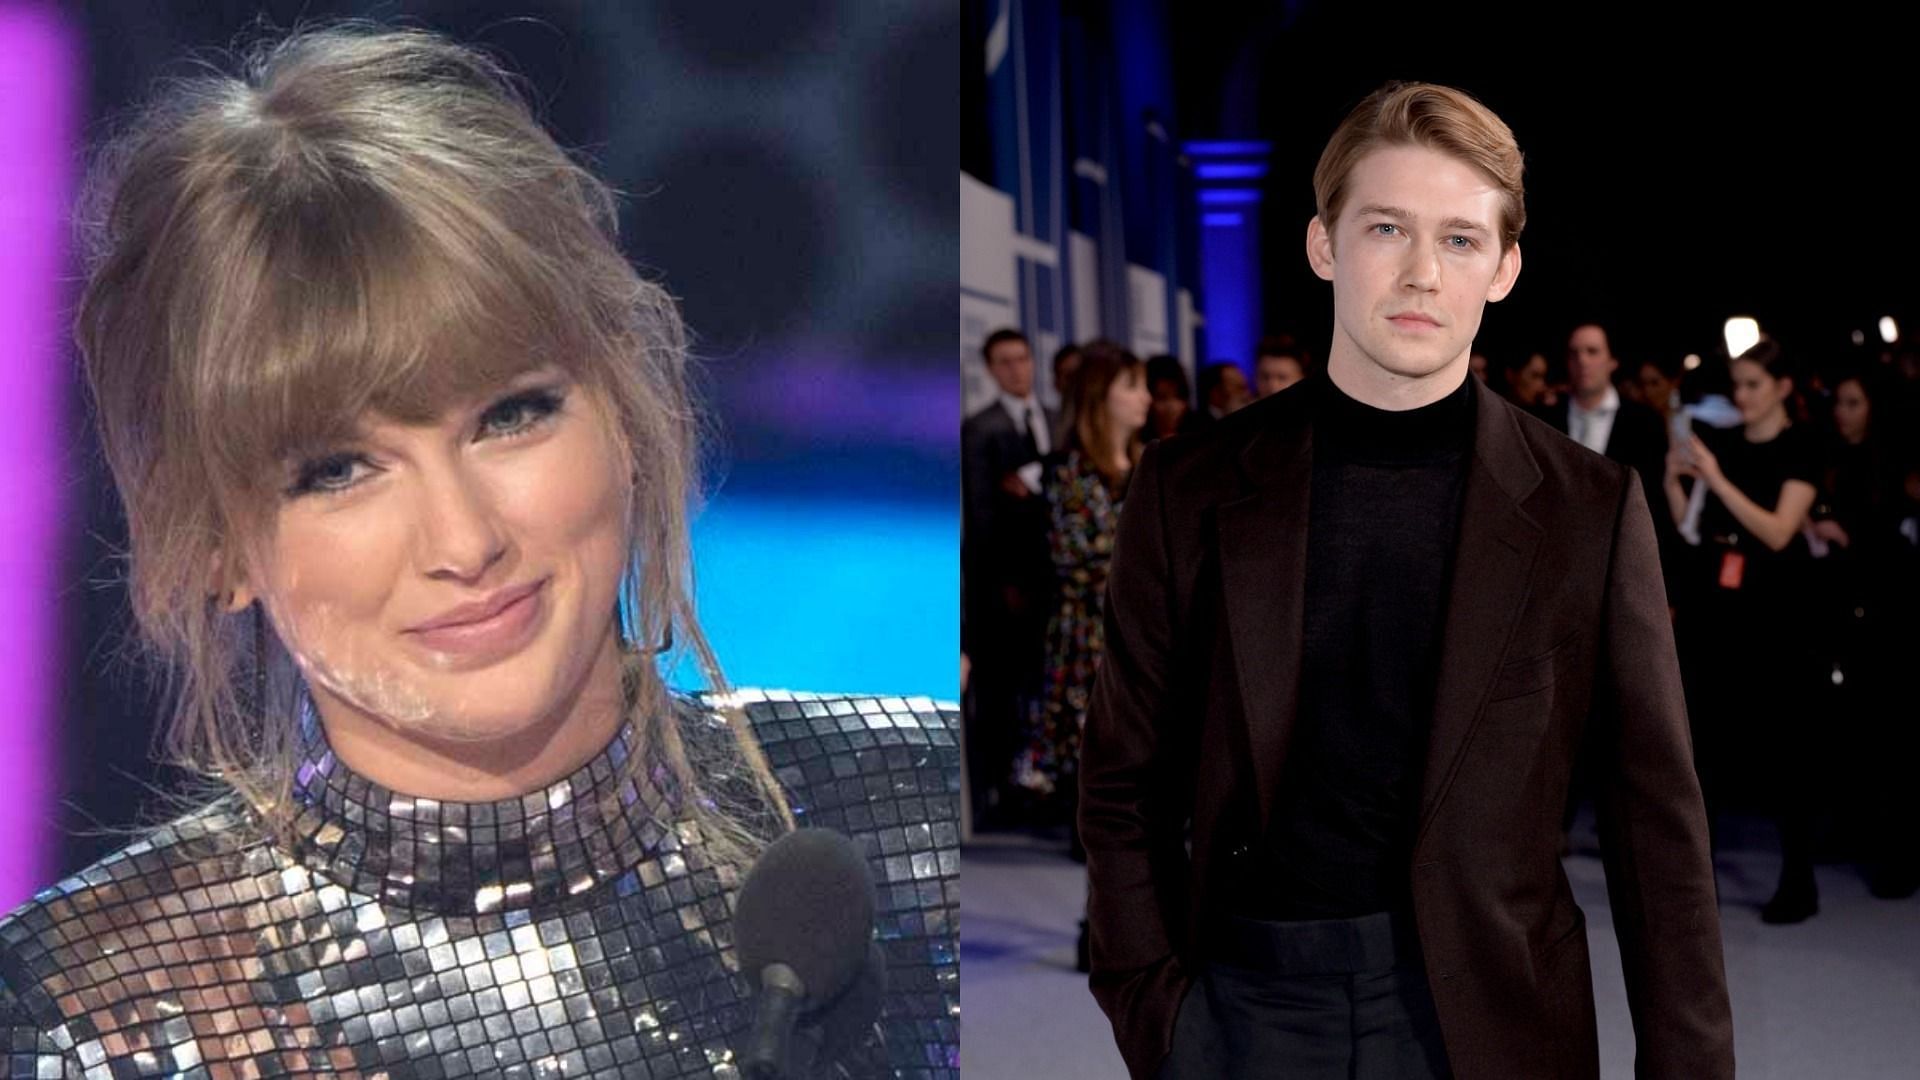 Taylor Swift and Joe Alwyn have sparked multiple engagement and marriage rumors since last year (Images via Group LA/Getty Images and Dave J Hogan/Getty Images)